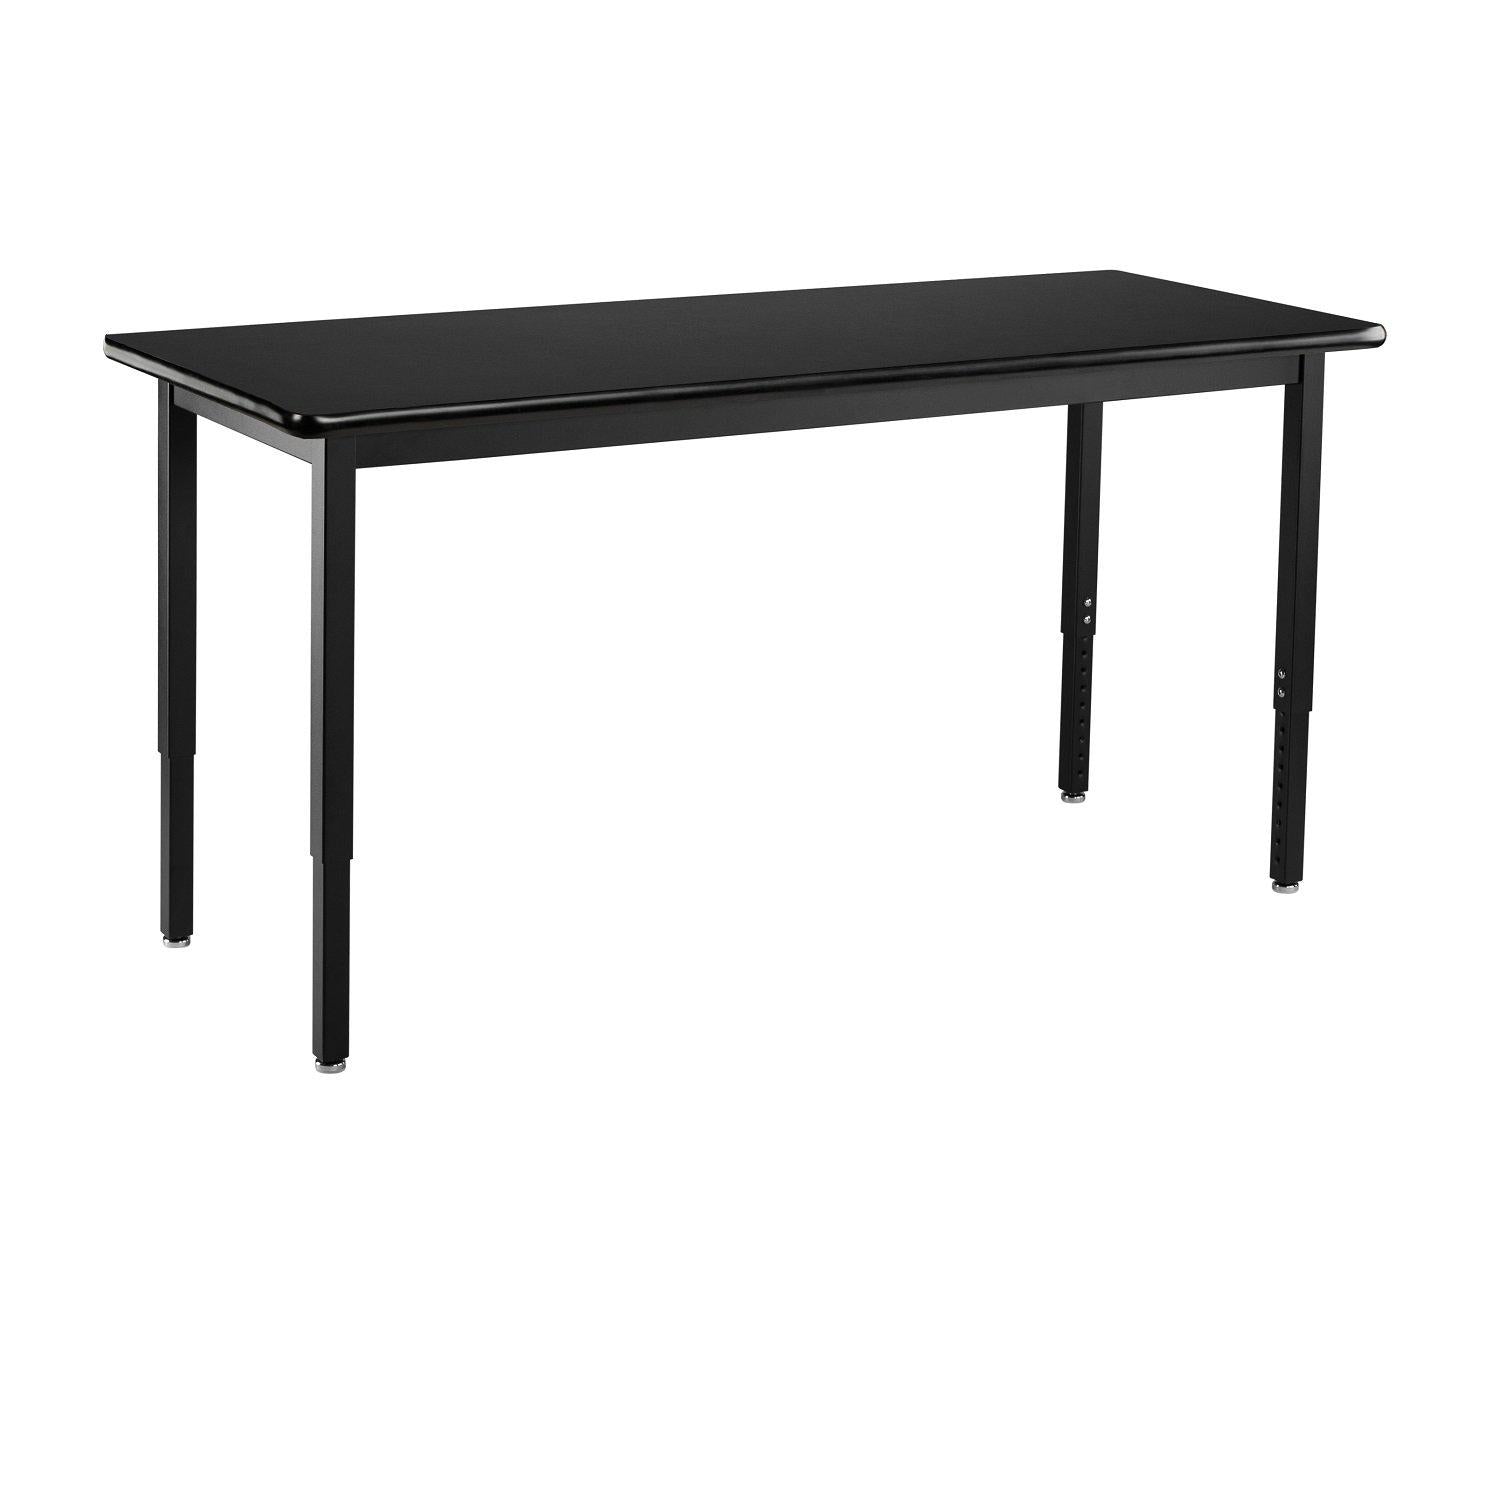 Heavy-Duty Height-Adjustable Utility Table, Black Frame, 24" x 48", High-Pressure Laminate Top with T-Mold Edge